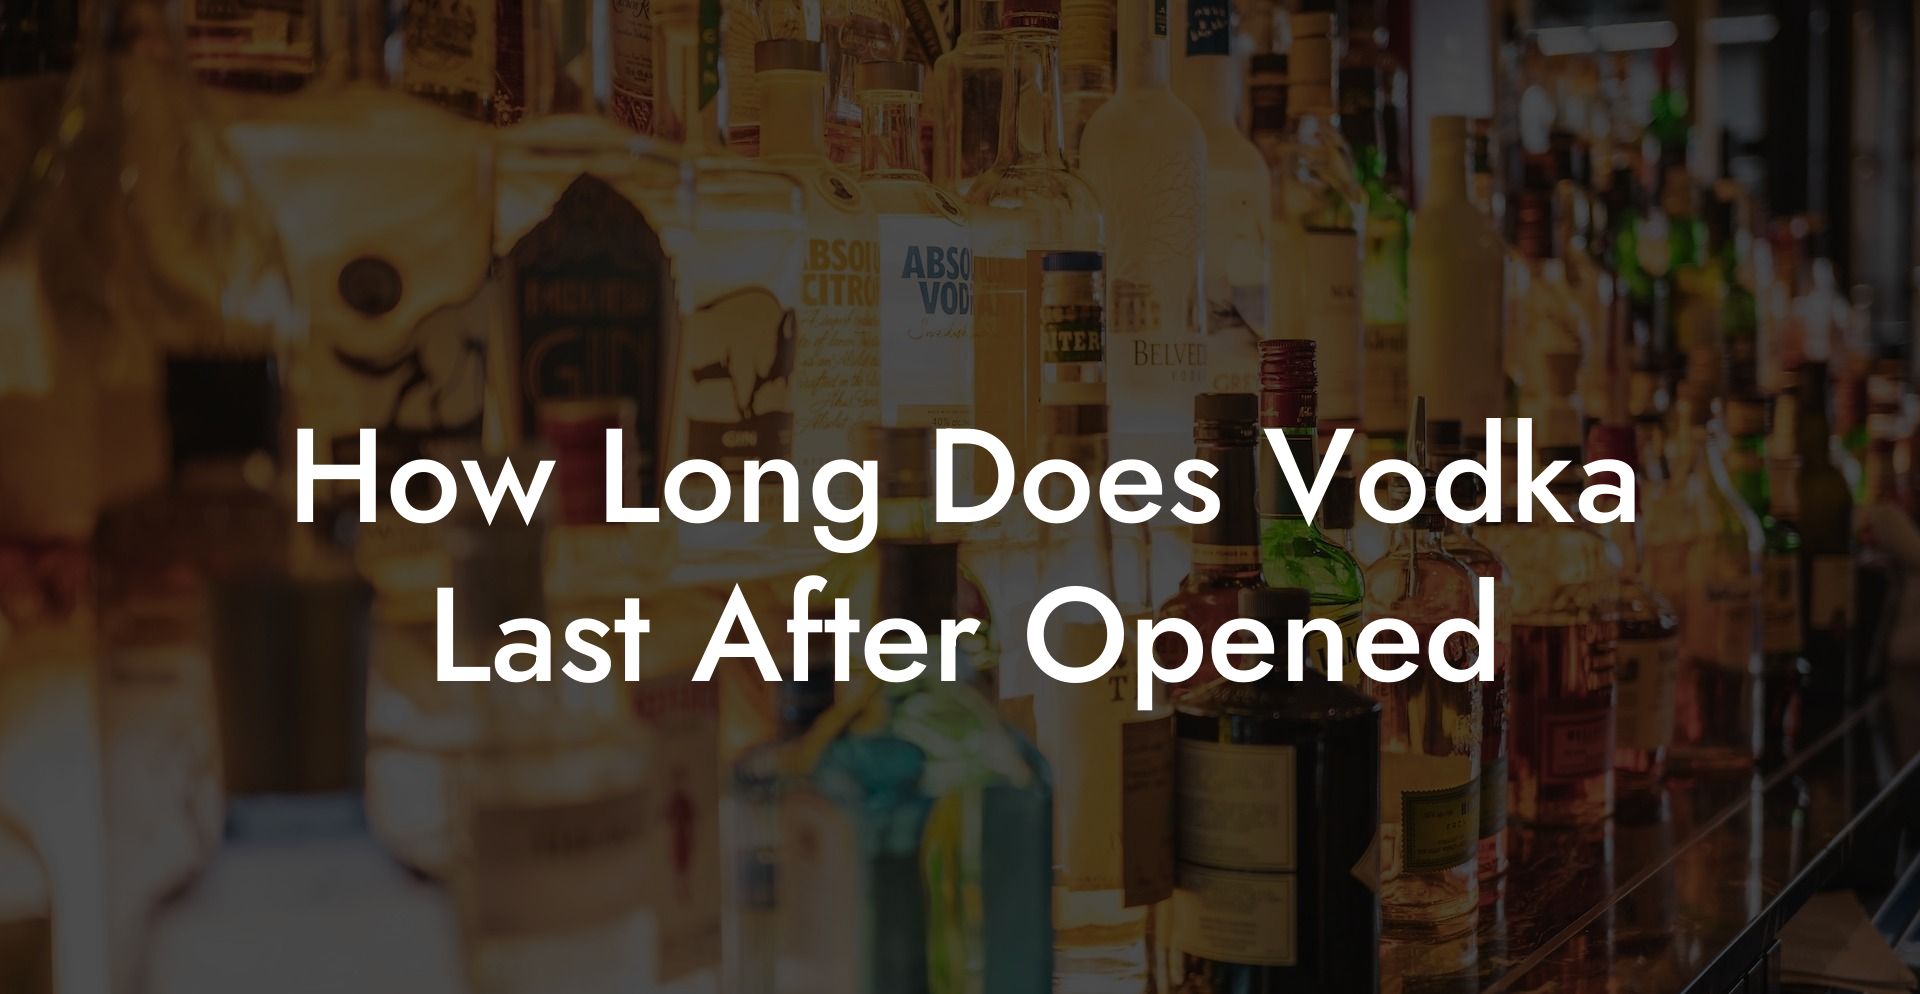 How Long Does Vodka Last After Opened